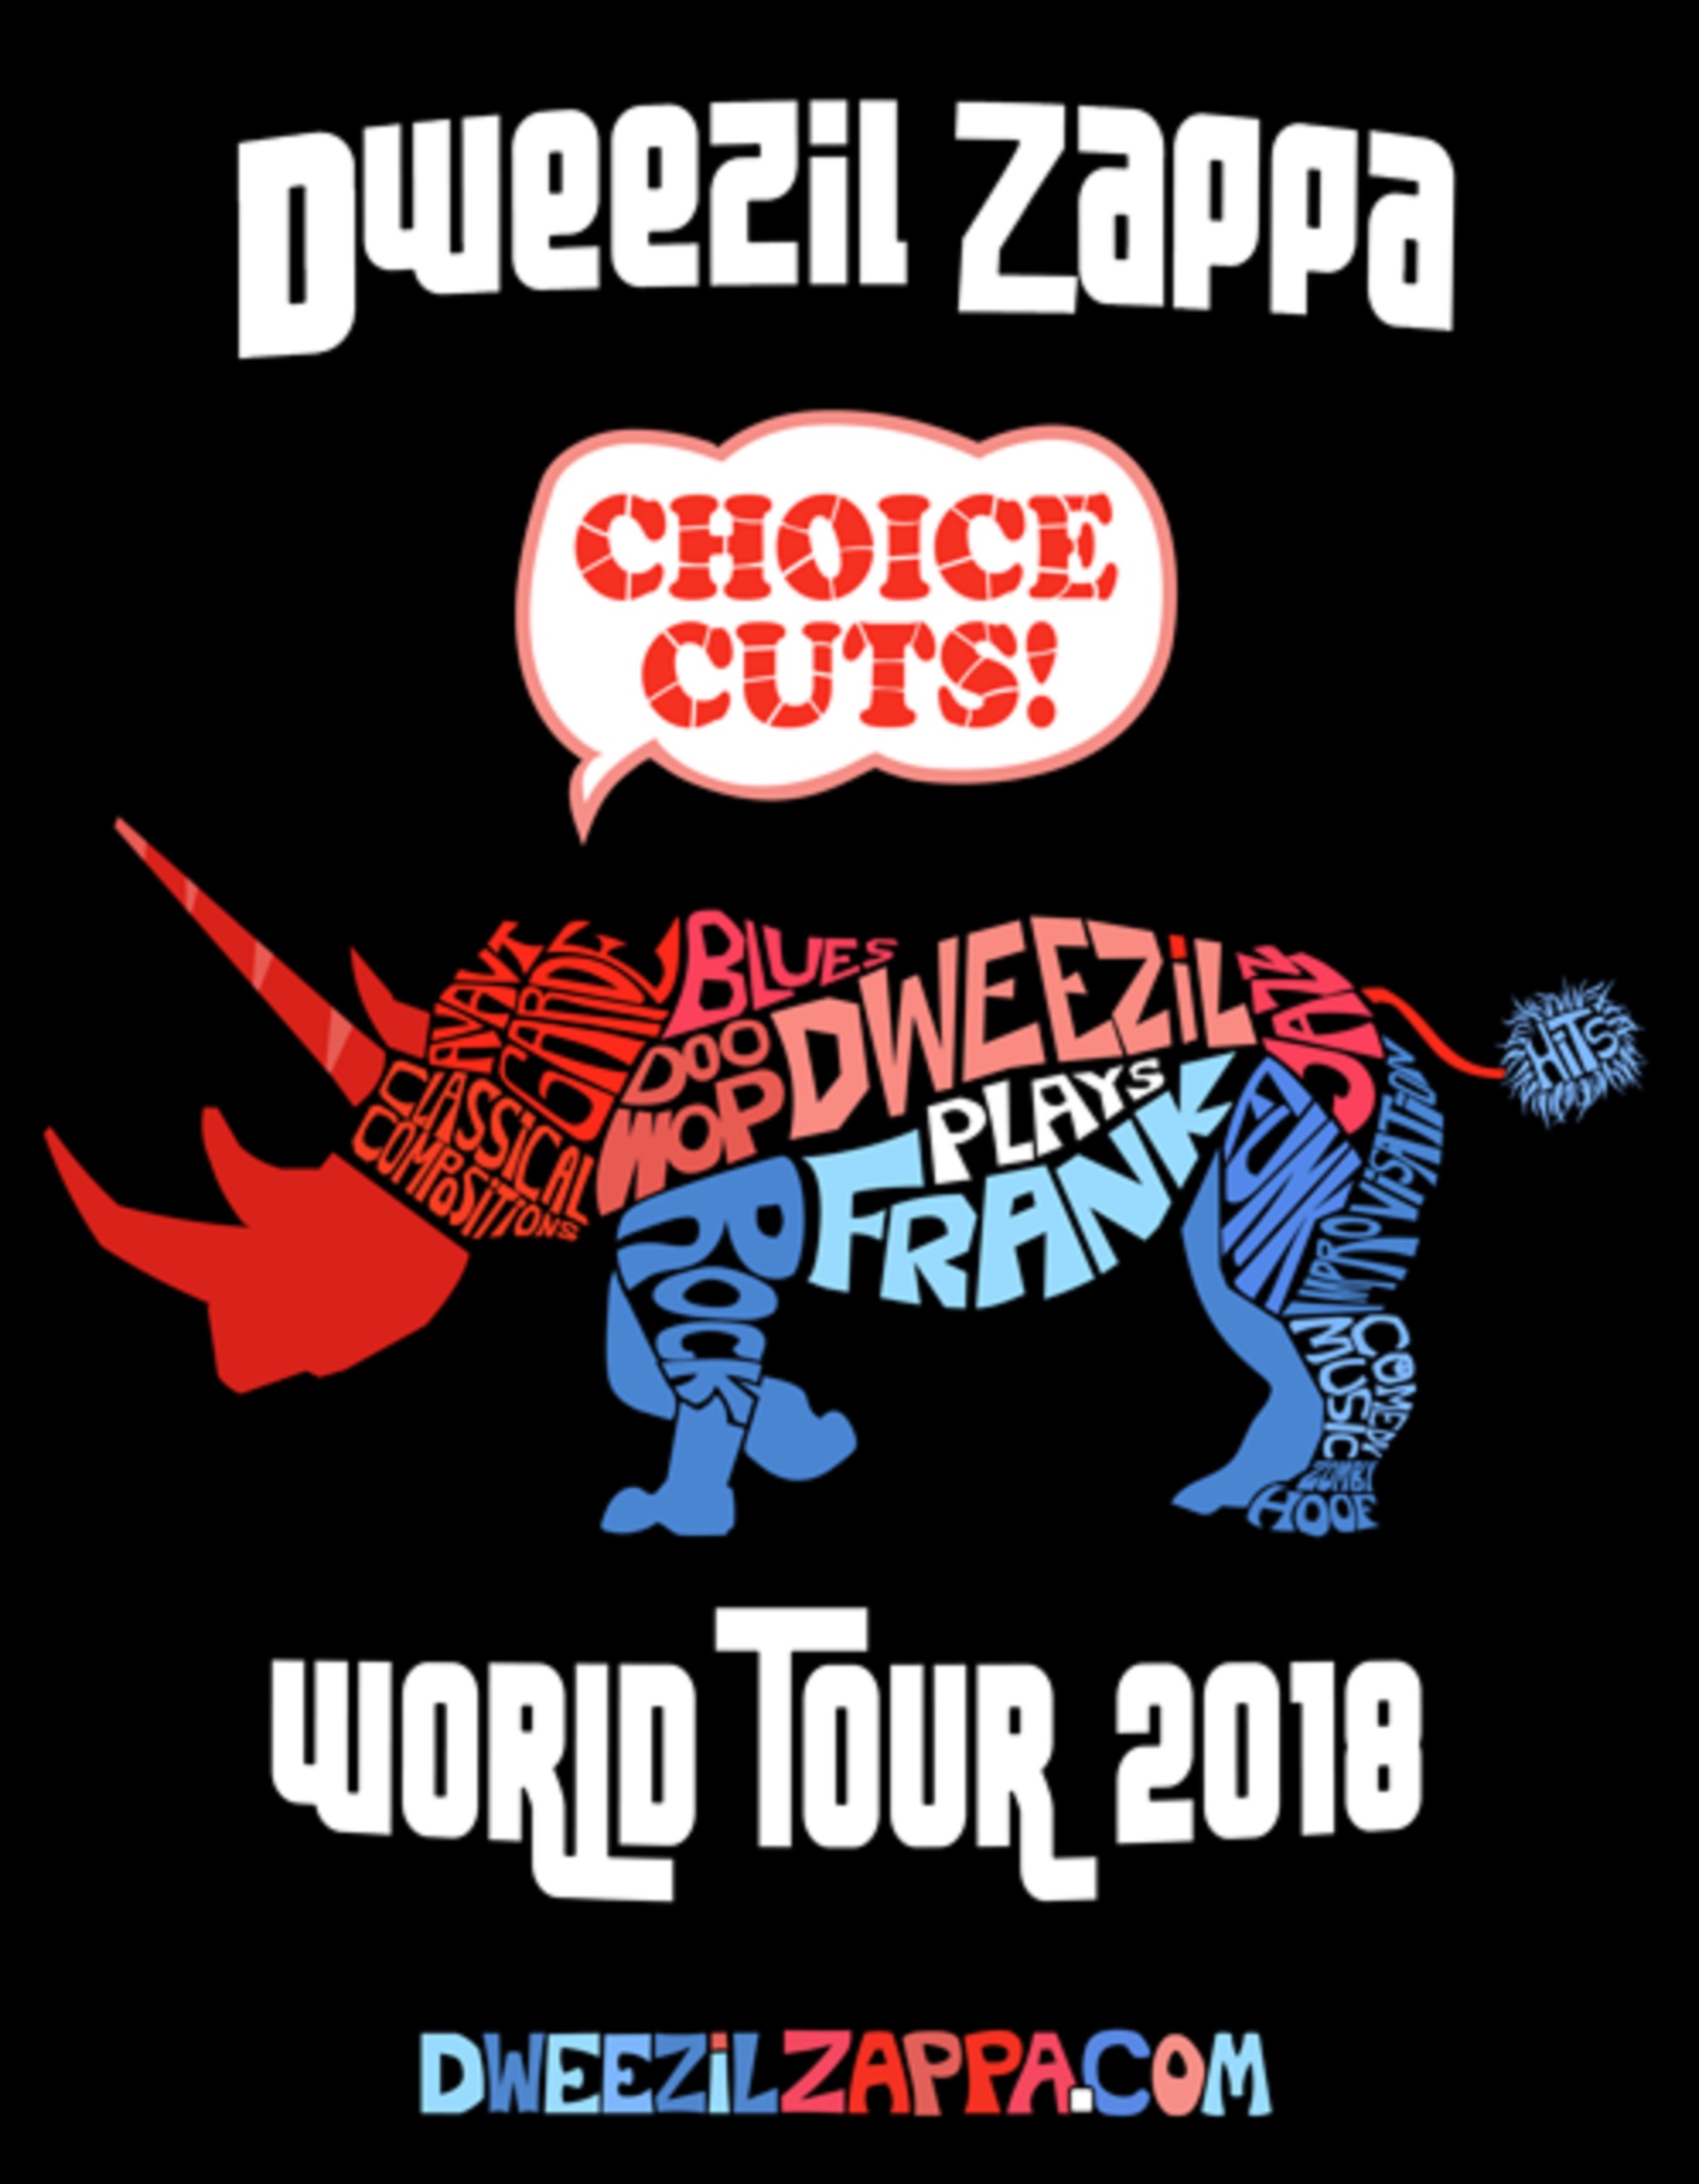 Dweezil Zappa "Choice Cuts" Tour comes to Beverly, MA